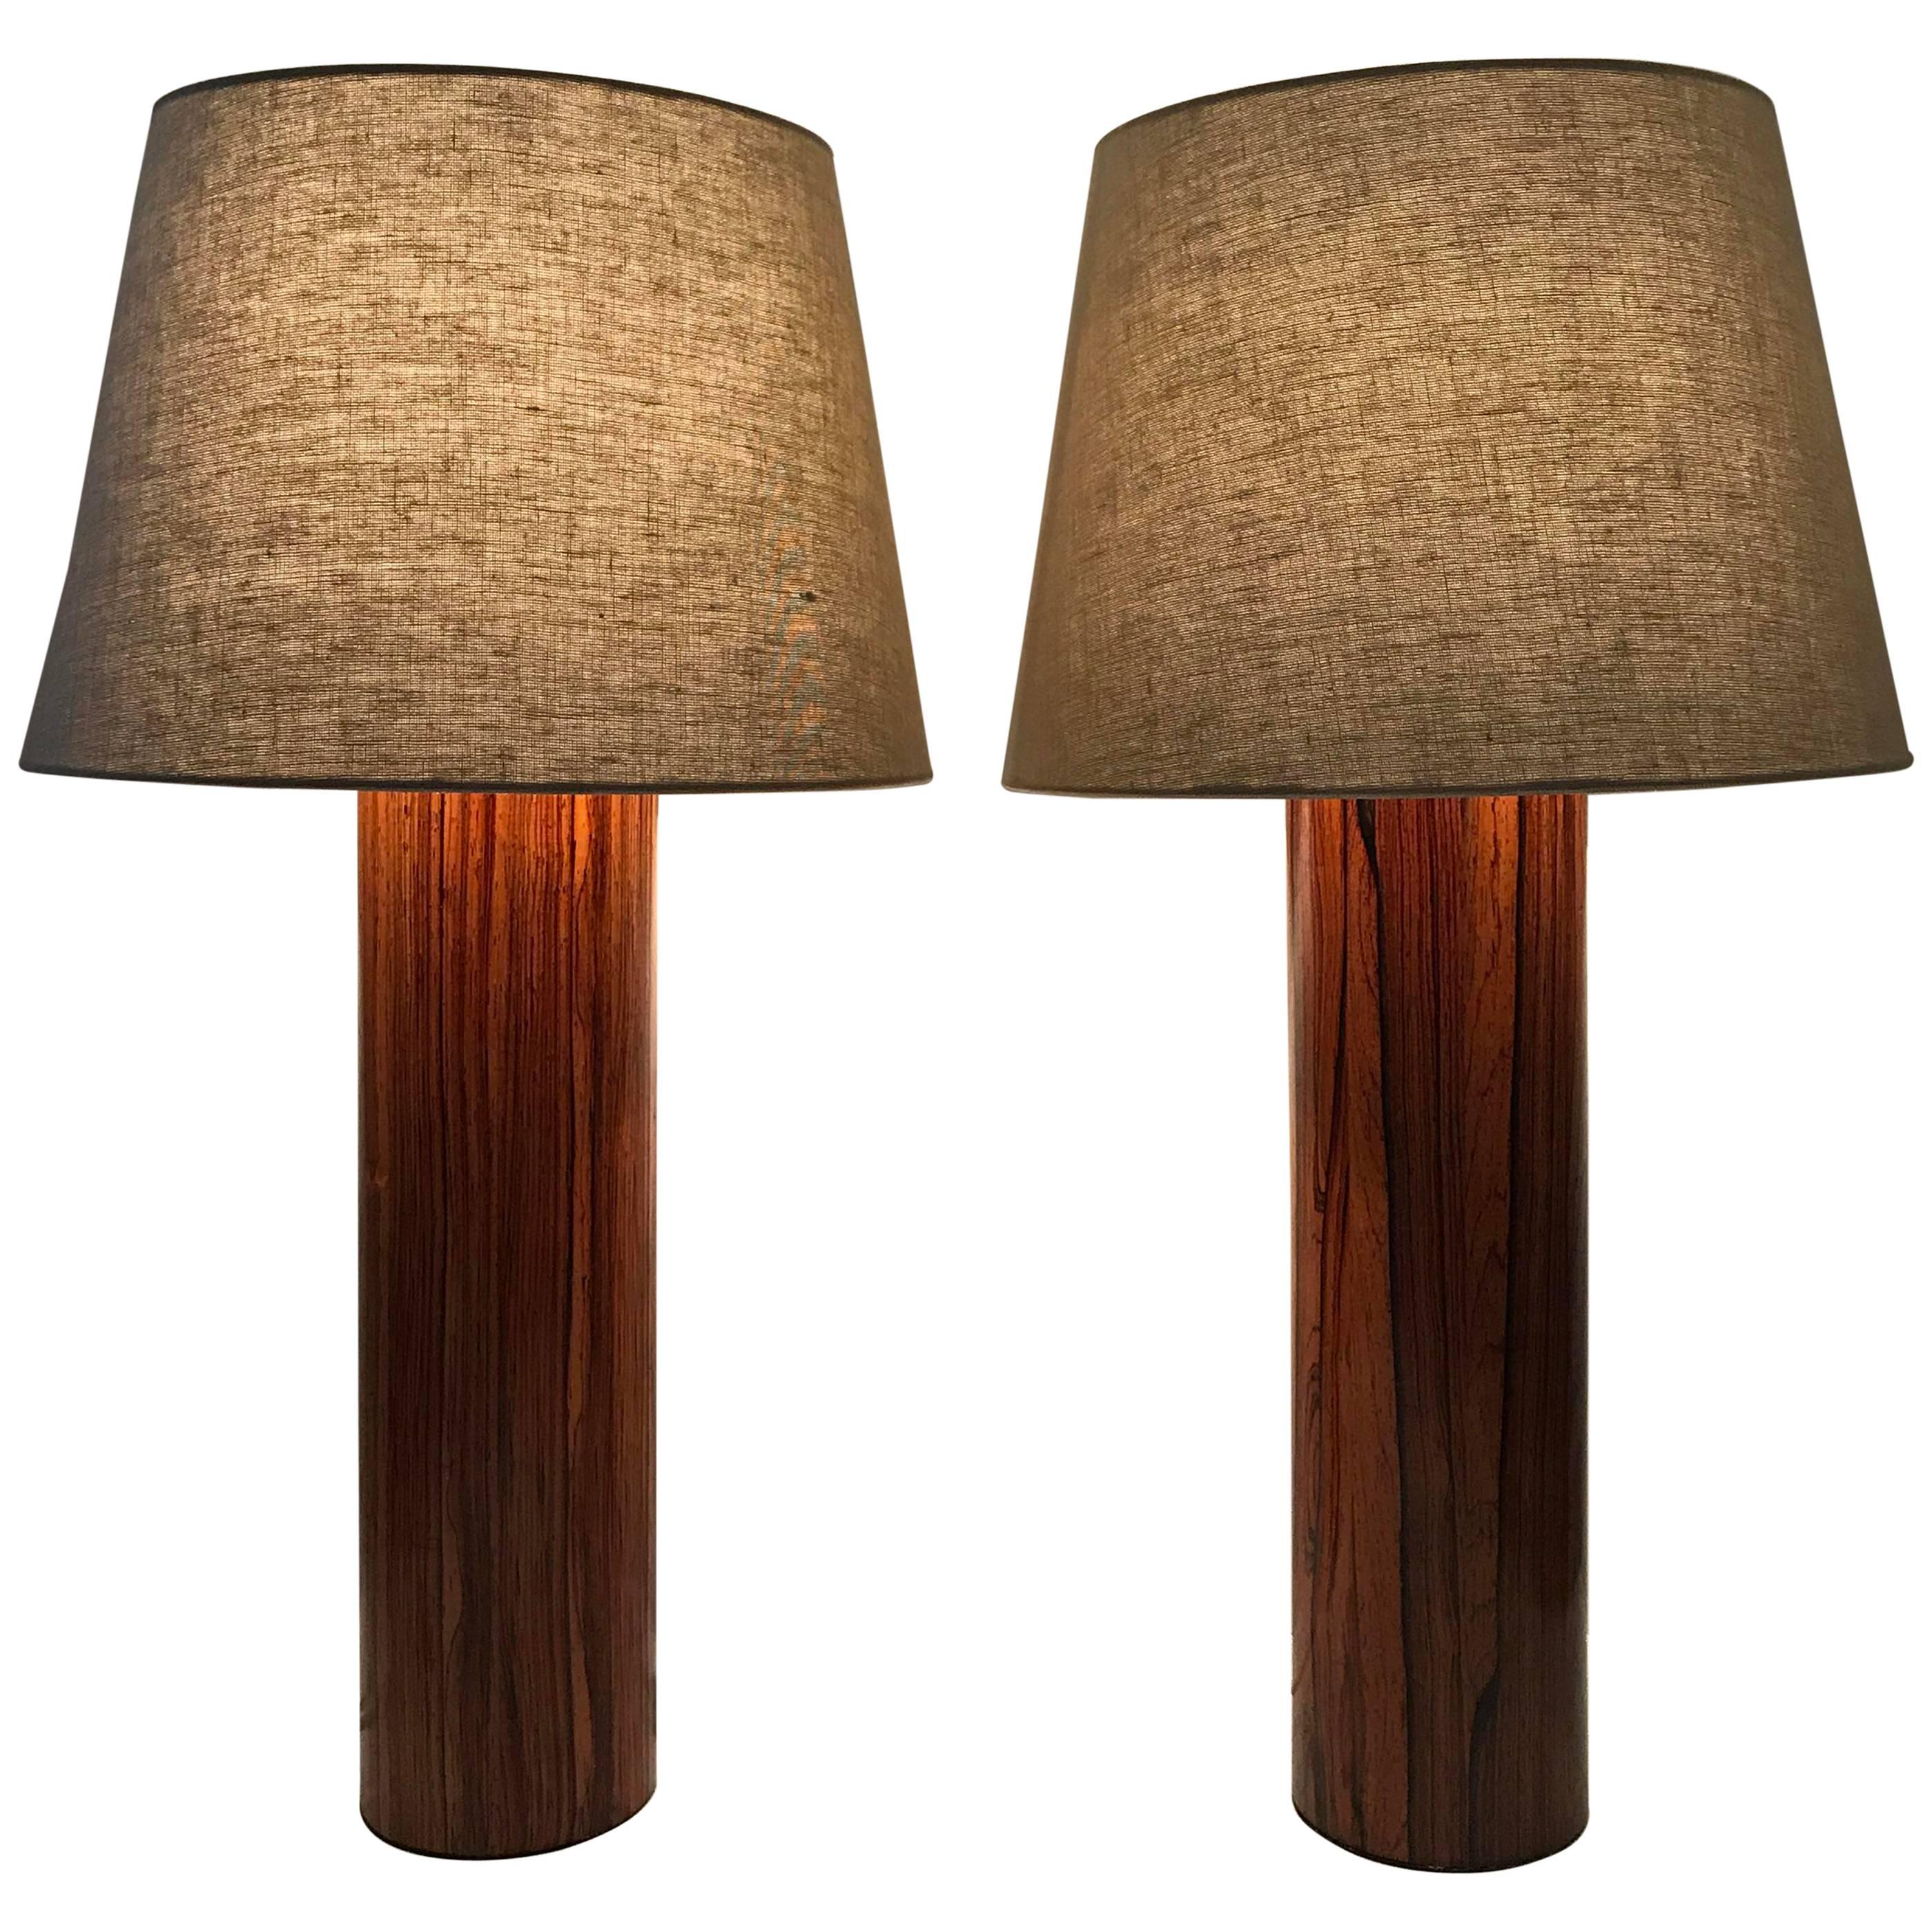 Large Pair of Swedish Luxus Rosewood Table Lamps by Uno & Östen Kristiansson For Sale